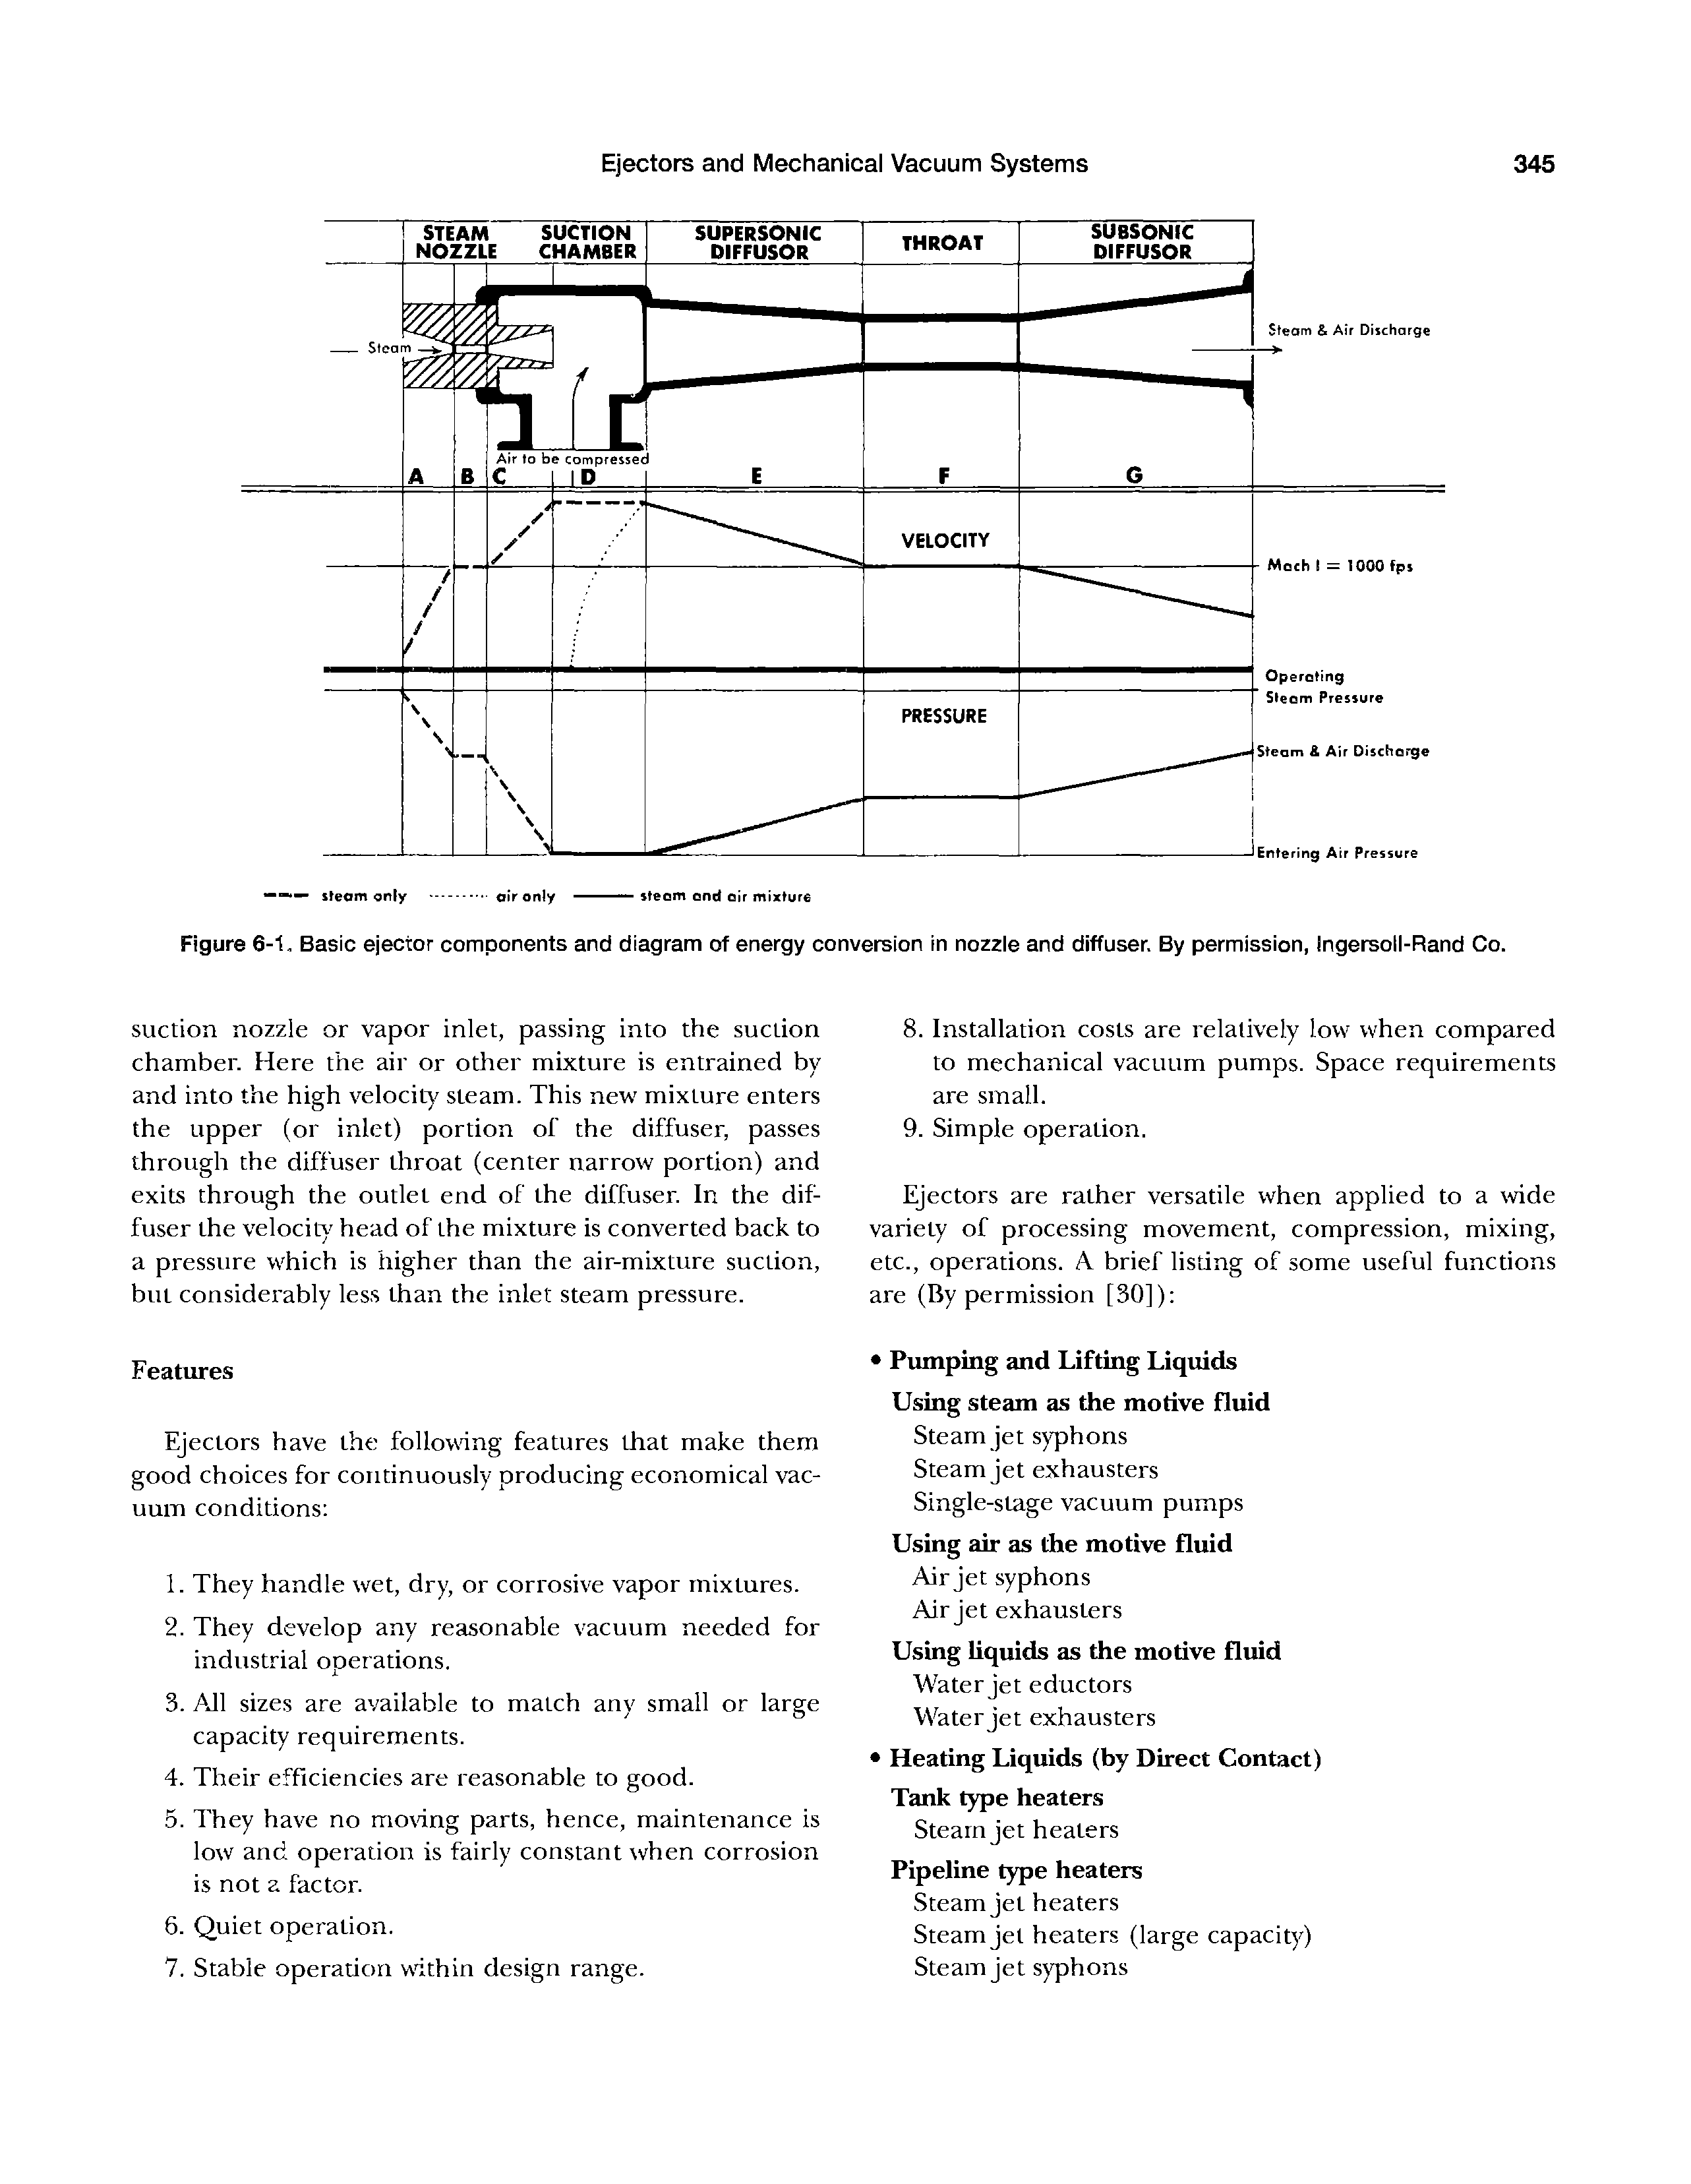 Figure 6-1. Basic ejector components and diagram of energy conversion in nozzle and diffuser. By permission, Ingersoll-Rand Co.